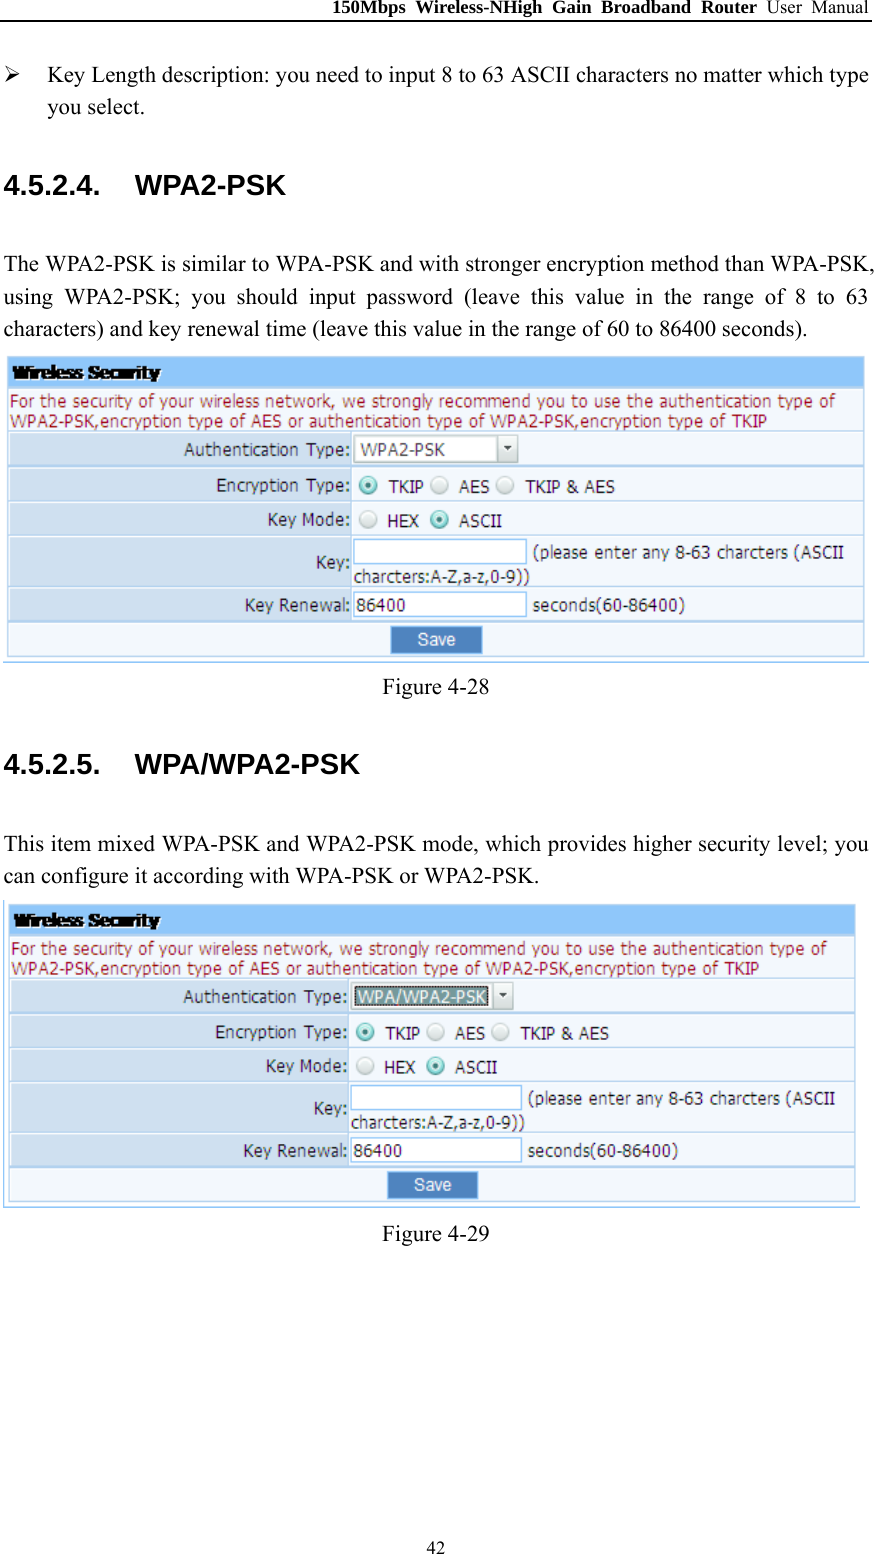 150Mbps Wireless-NHigh Gain Broadband Router User Manual  Key Length description: you need to input 8 to 63 ASCII characters no matter which type you select. 4.5.2.4.  WPA2-PSK The WPA2-PSK is similar to WPA-PSK and with stronger encryption method than WPA-PSK, using WPA2-PSK; you should input password (leave this value in the range of 8 to 63 characters) and key renewal time (leave this value in the range of 60 to 86400 seconds).  Figure 4-28 4.5.2.5.  WPA/WPA2-PSK This item mixed WPA-PSK and WPA2-PSK mode, which provides higher security level; you can configure it according with WPA-PSK or WPA2-PSK.  Figure 4-29  42